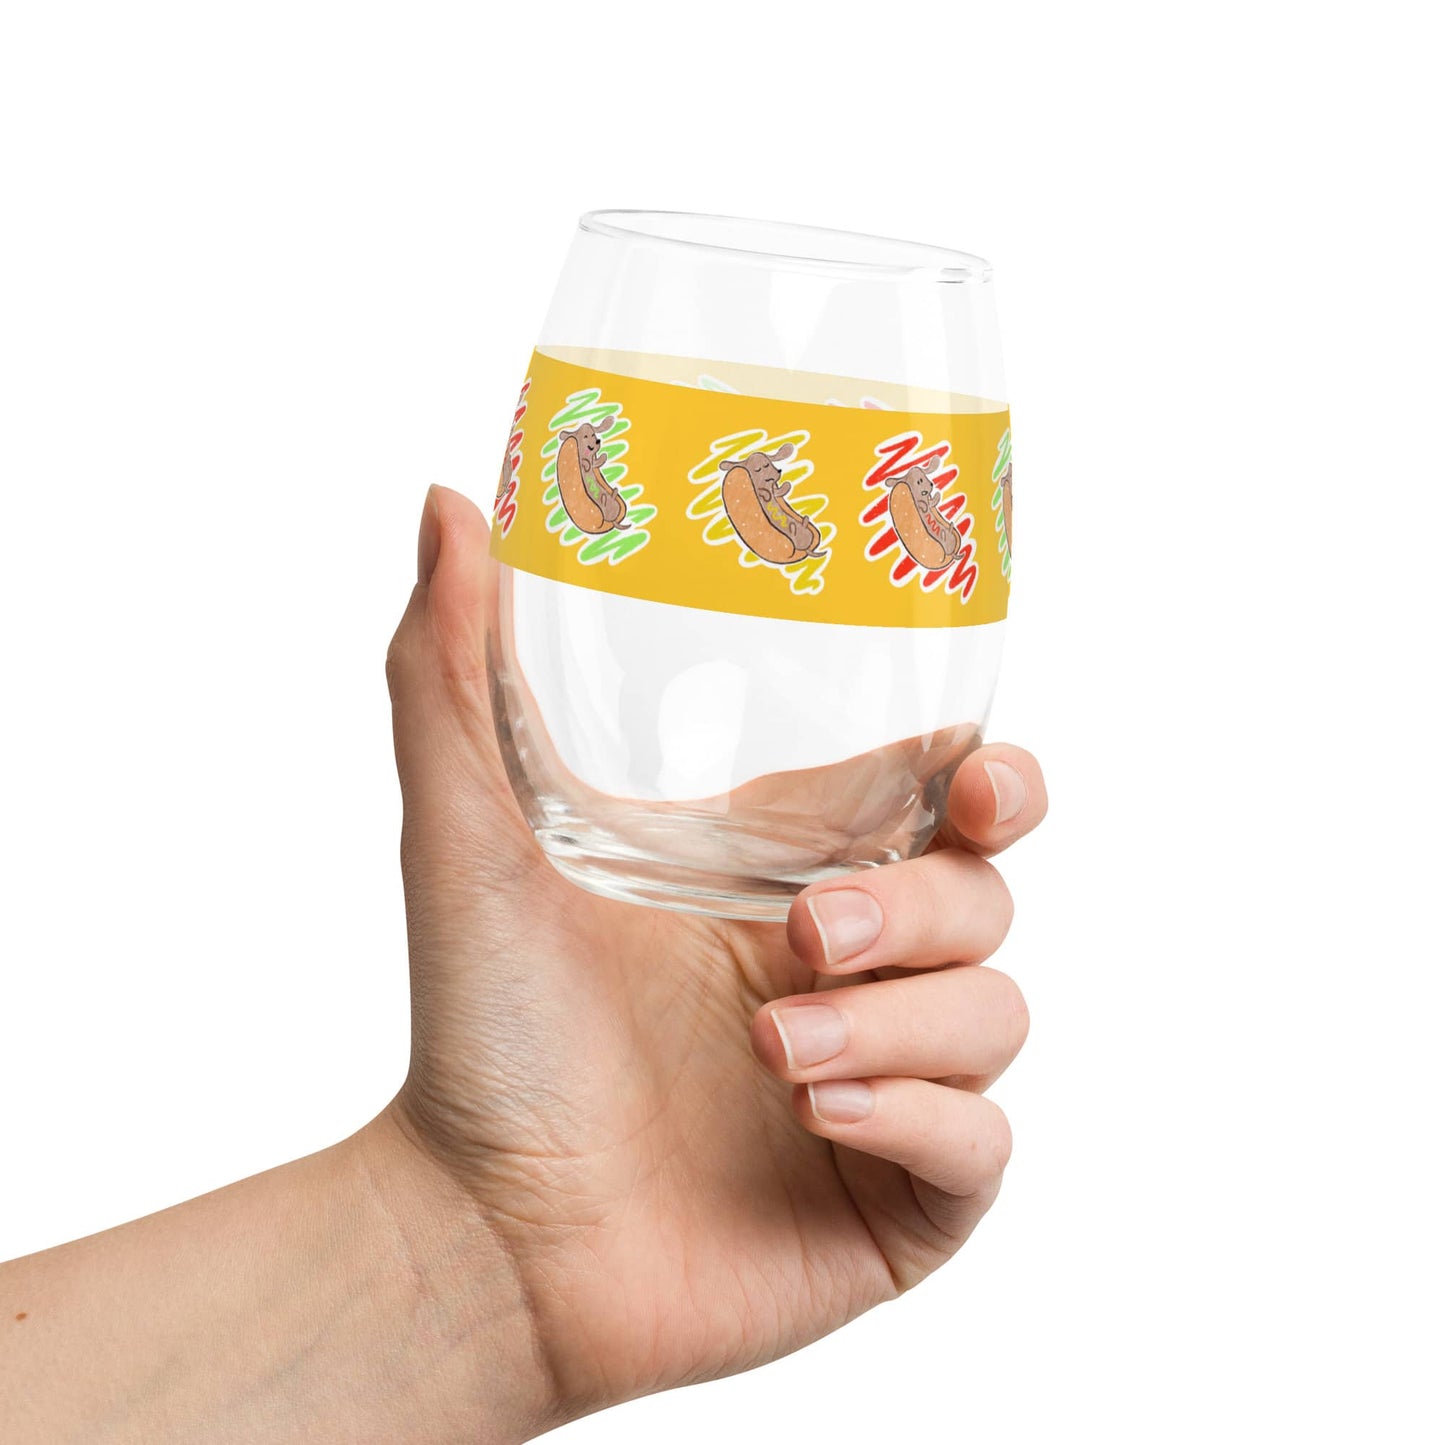 Shop Hot Dog Lover Stemless Wine Glass for Dachshund lovers.